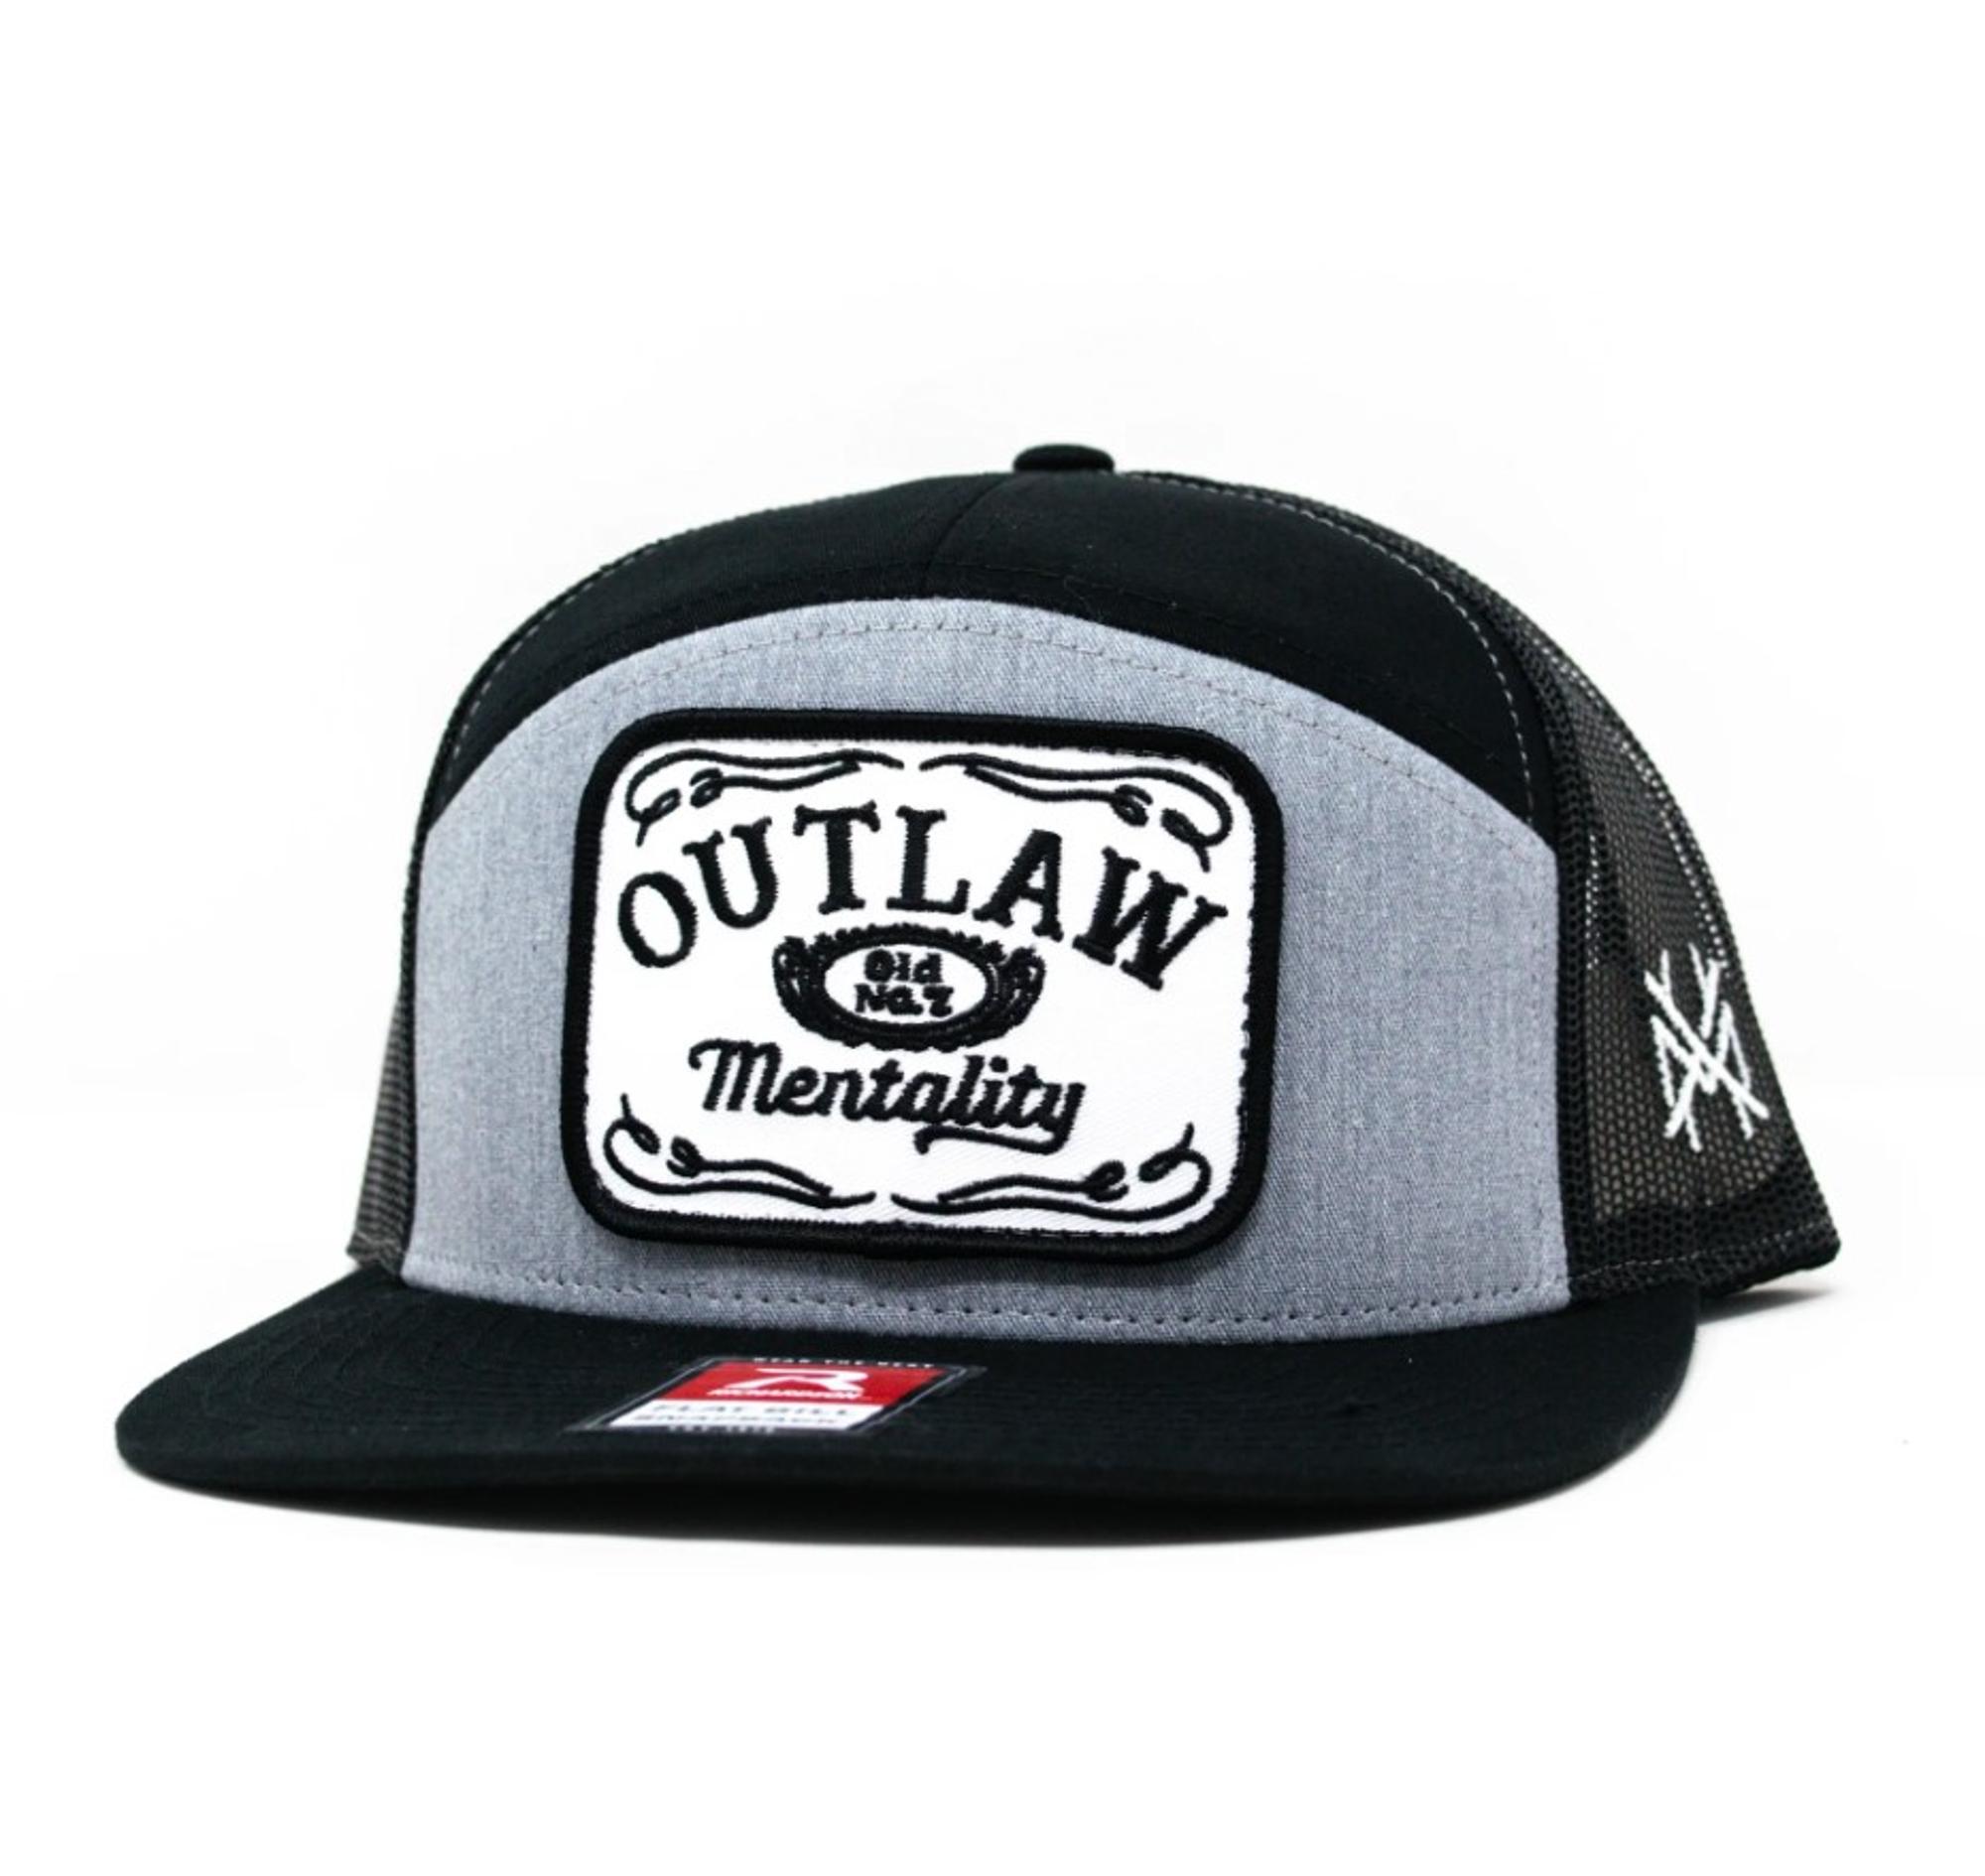 Outlaw Metally 7 Panel Trucker Hat